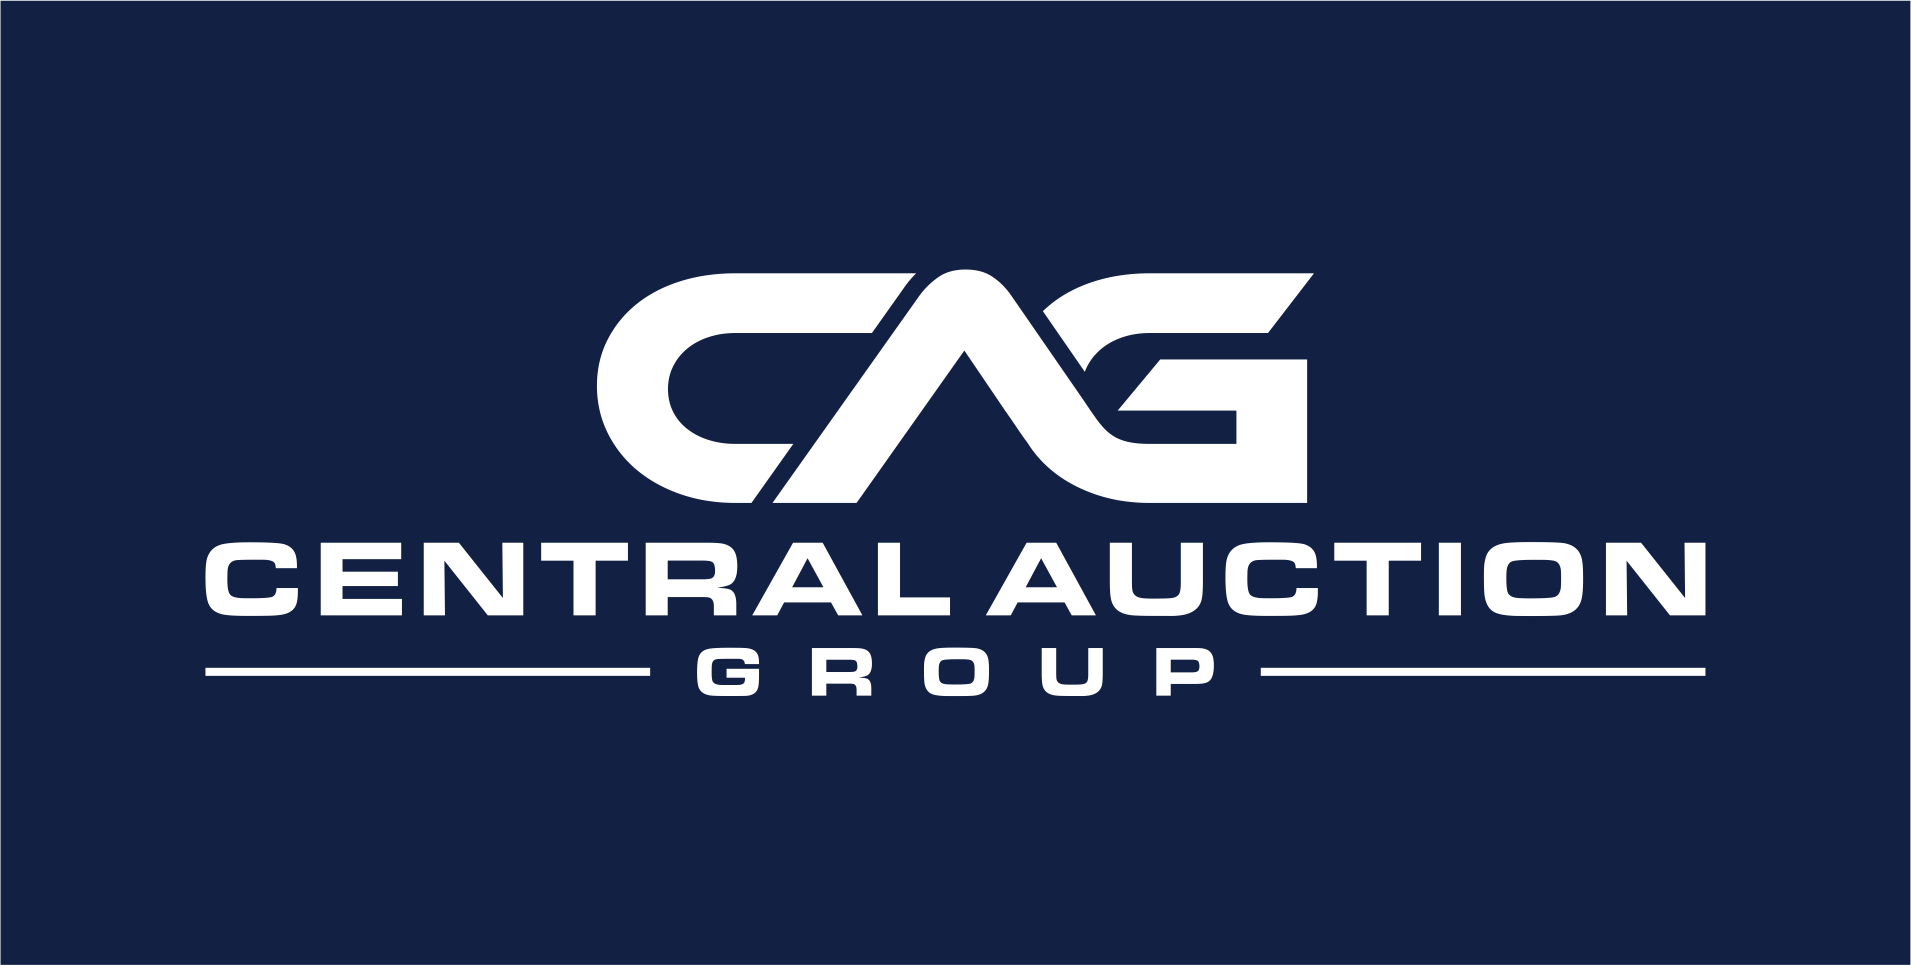 Central Auction Group logo